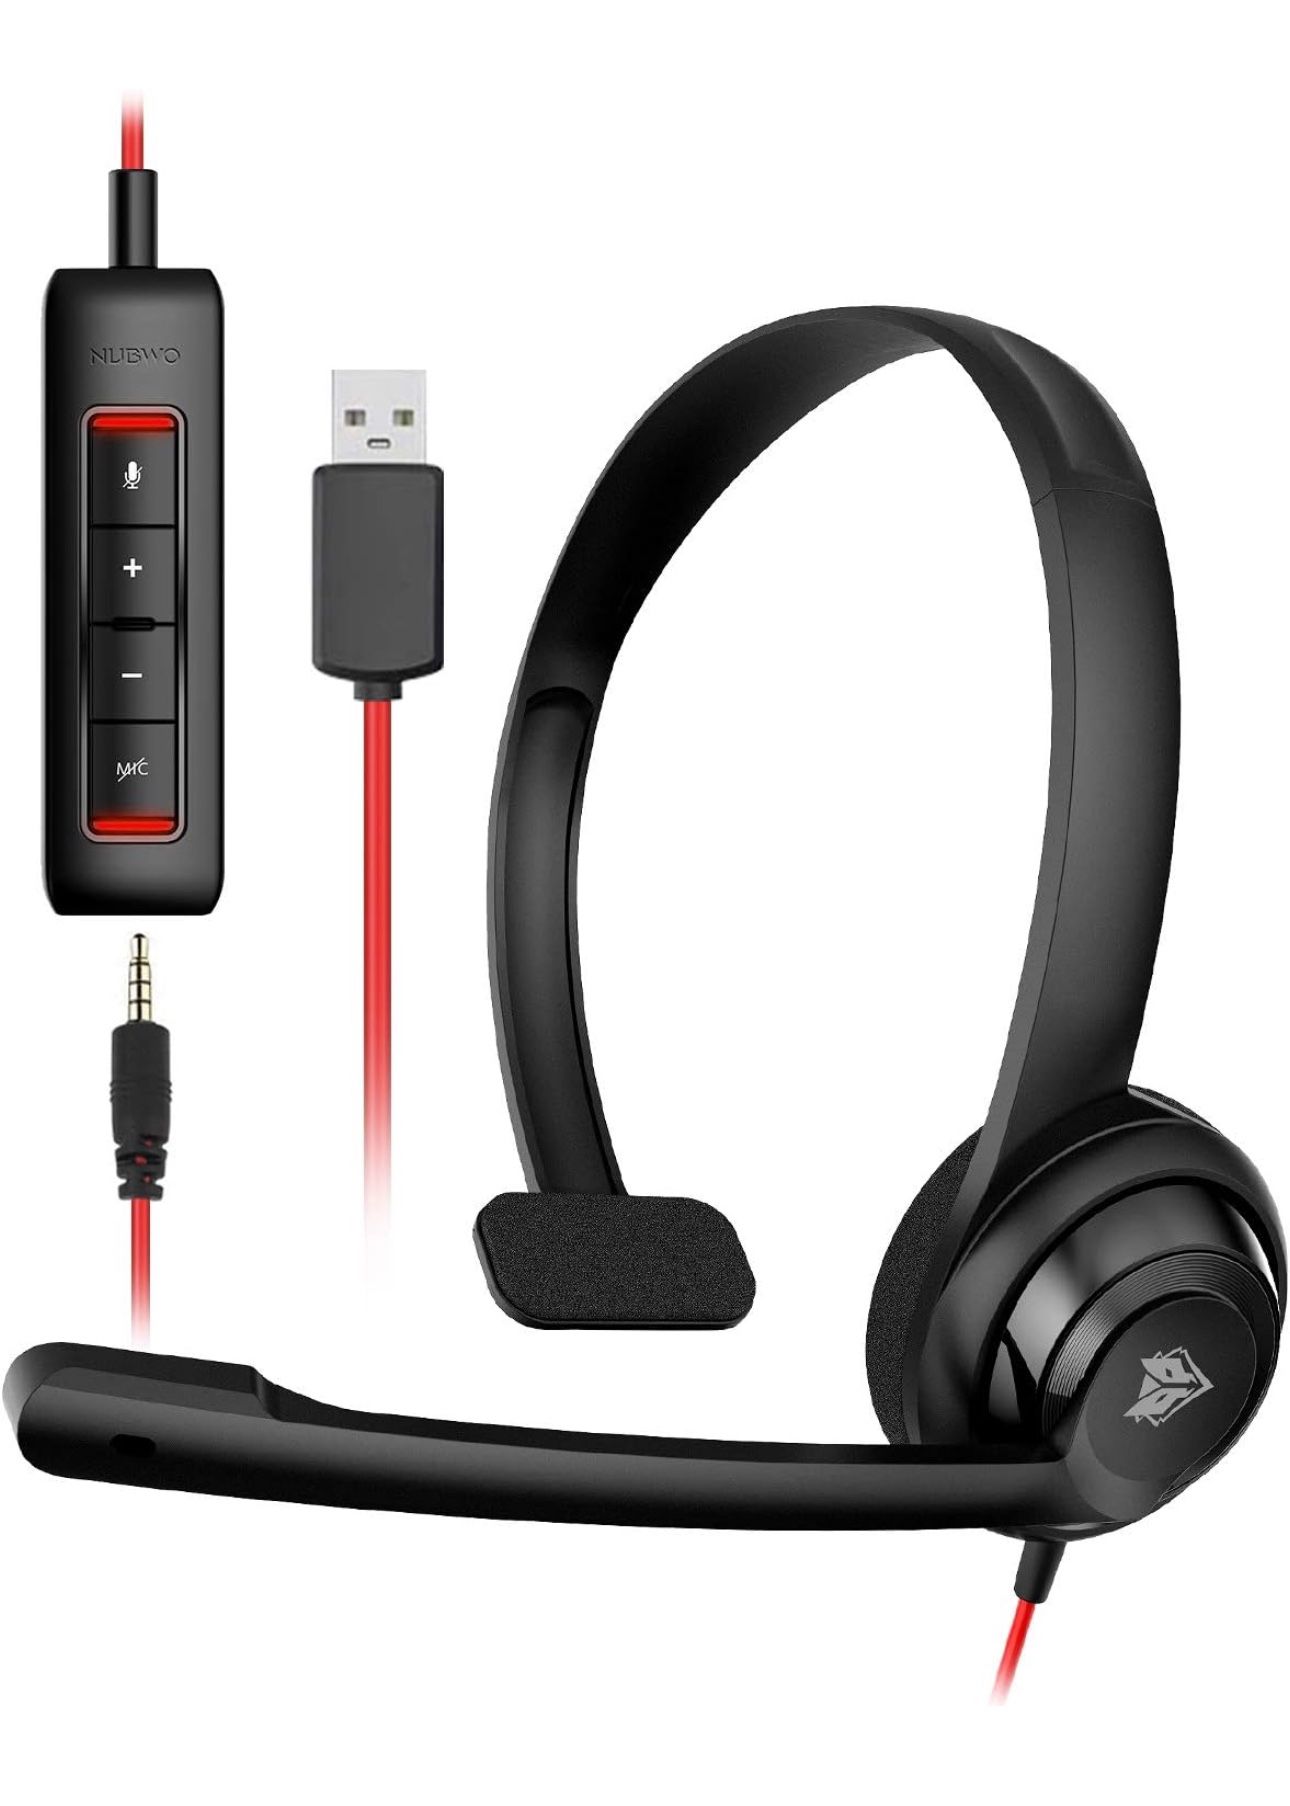 NUBWO HW02 USB Headset with Microphone Noise Cancelling &in-line Control, Super Light, Ultra Comfort Computer Headset for Laptop pc, On-Ear Wired Offi